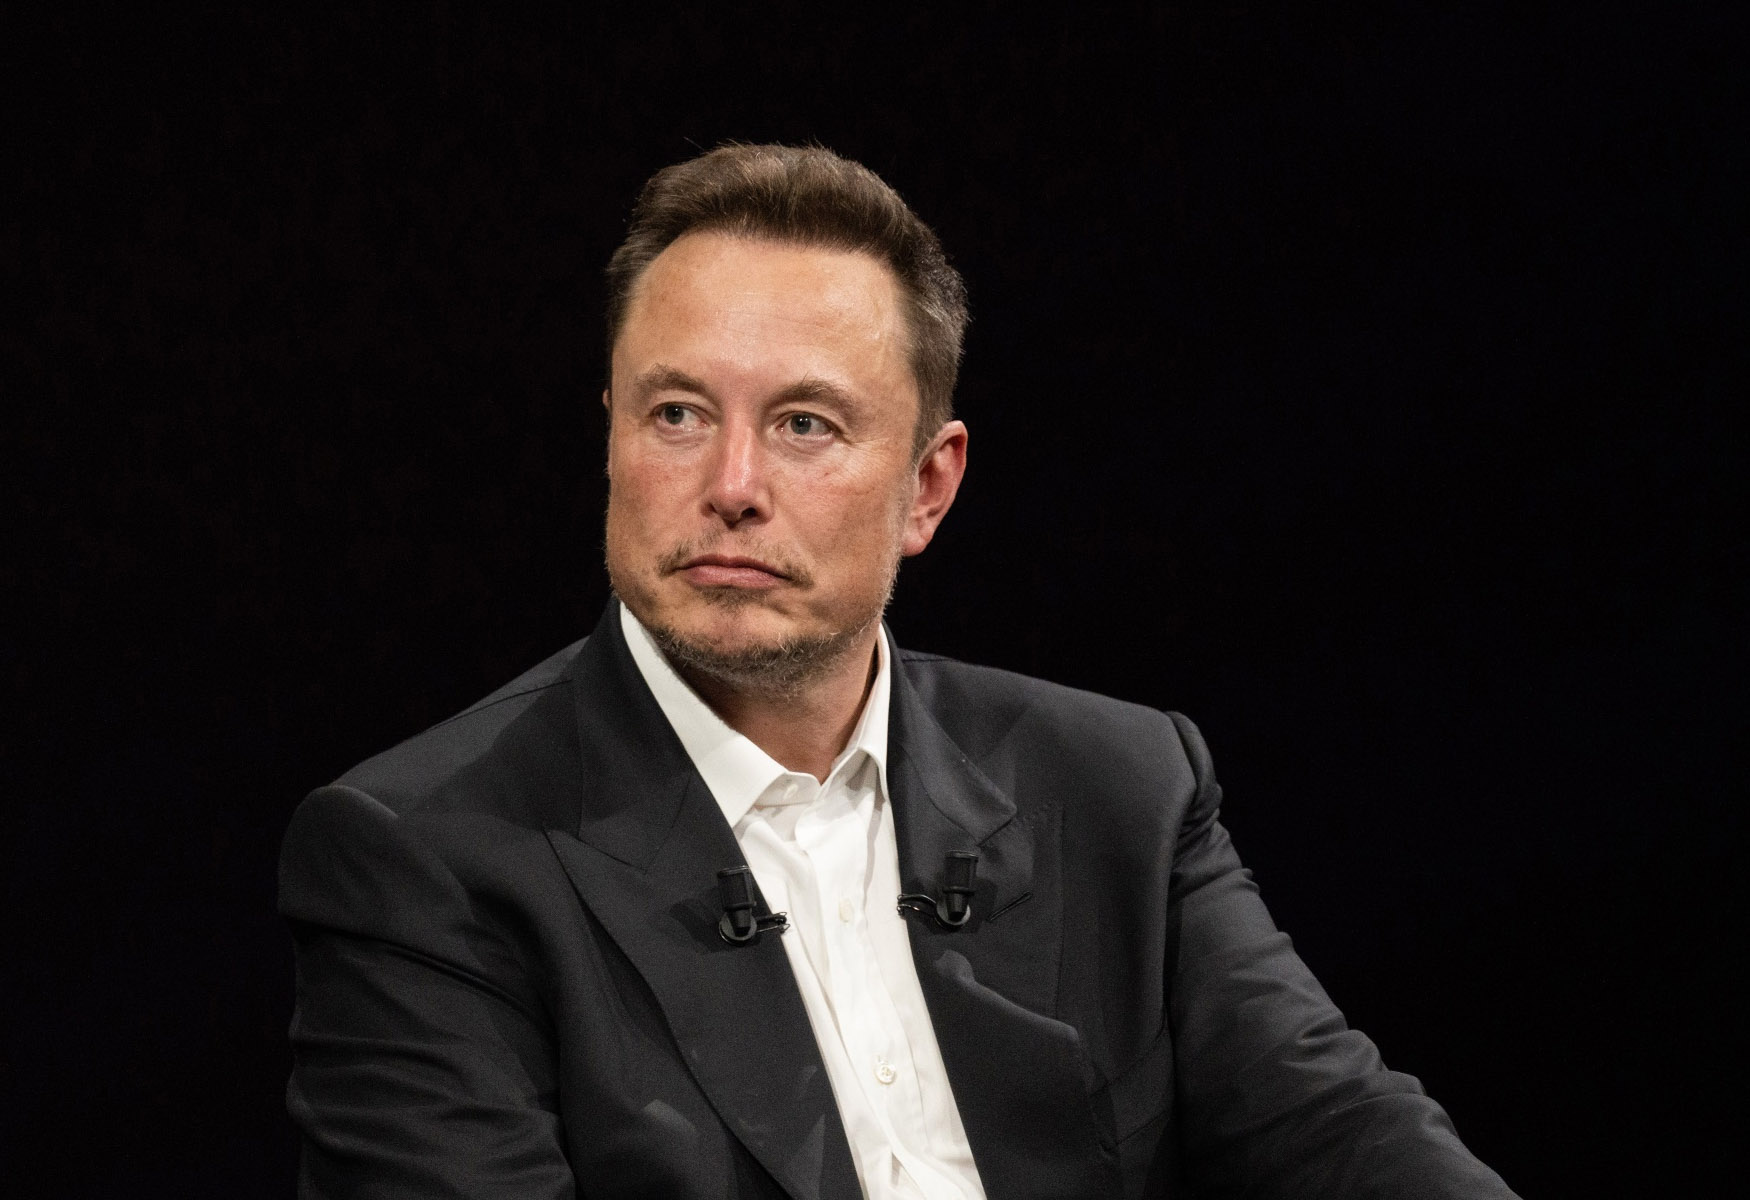 SEC To Compel Elon Musk’s Testimony In Twitter Stock Purchase Probe